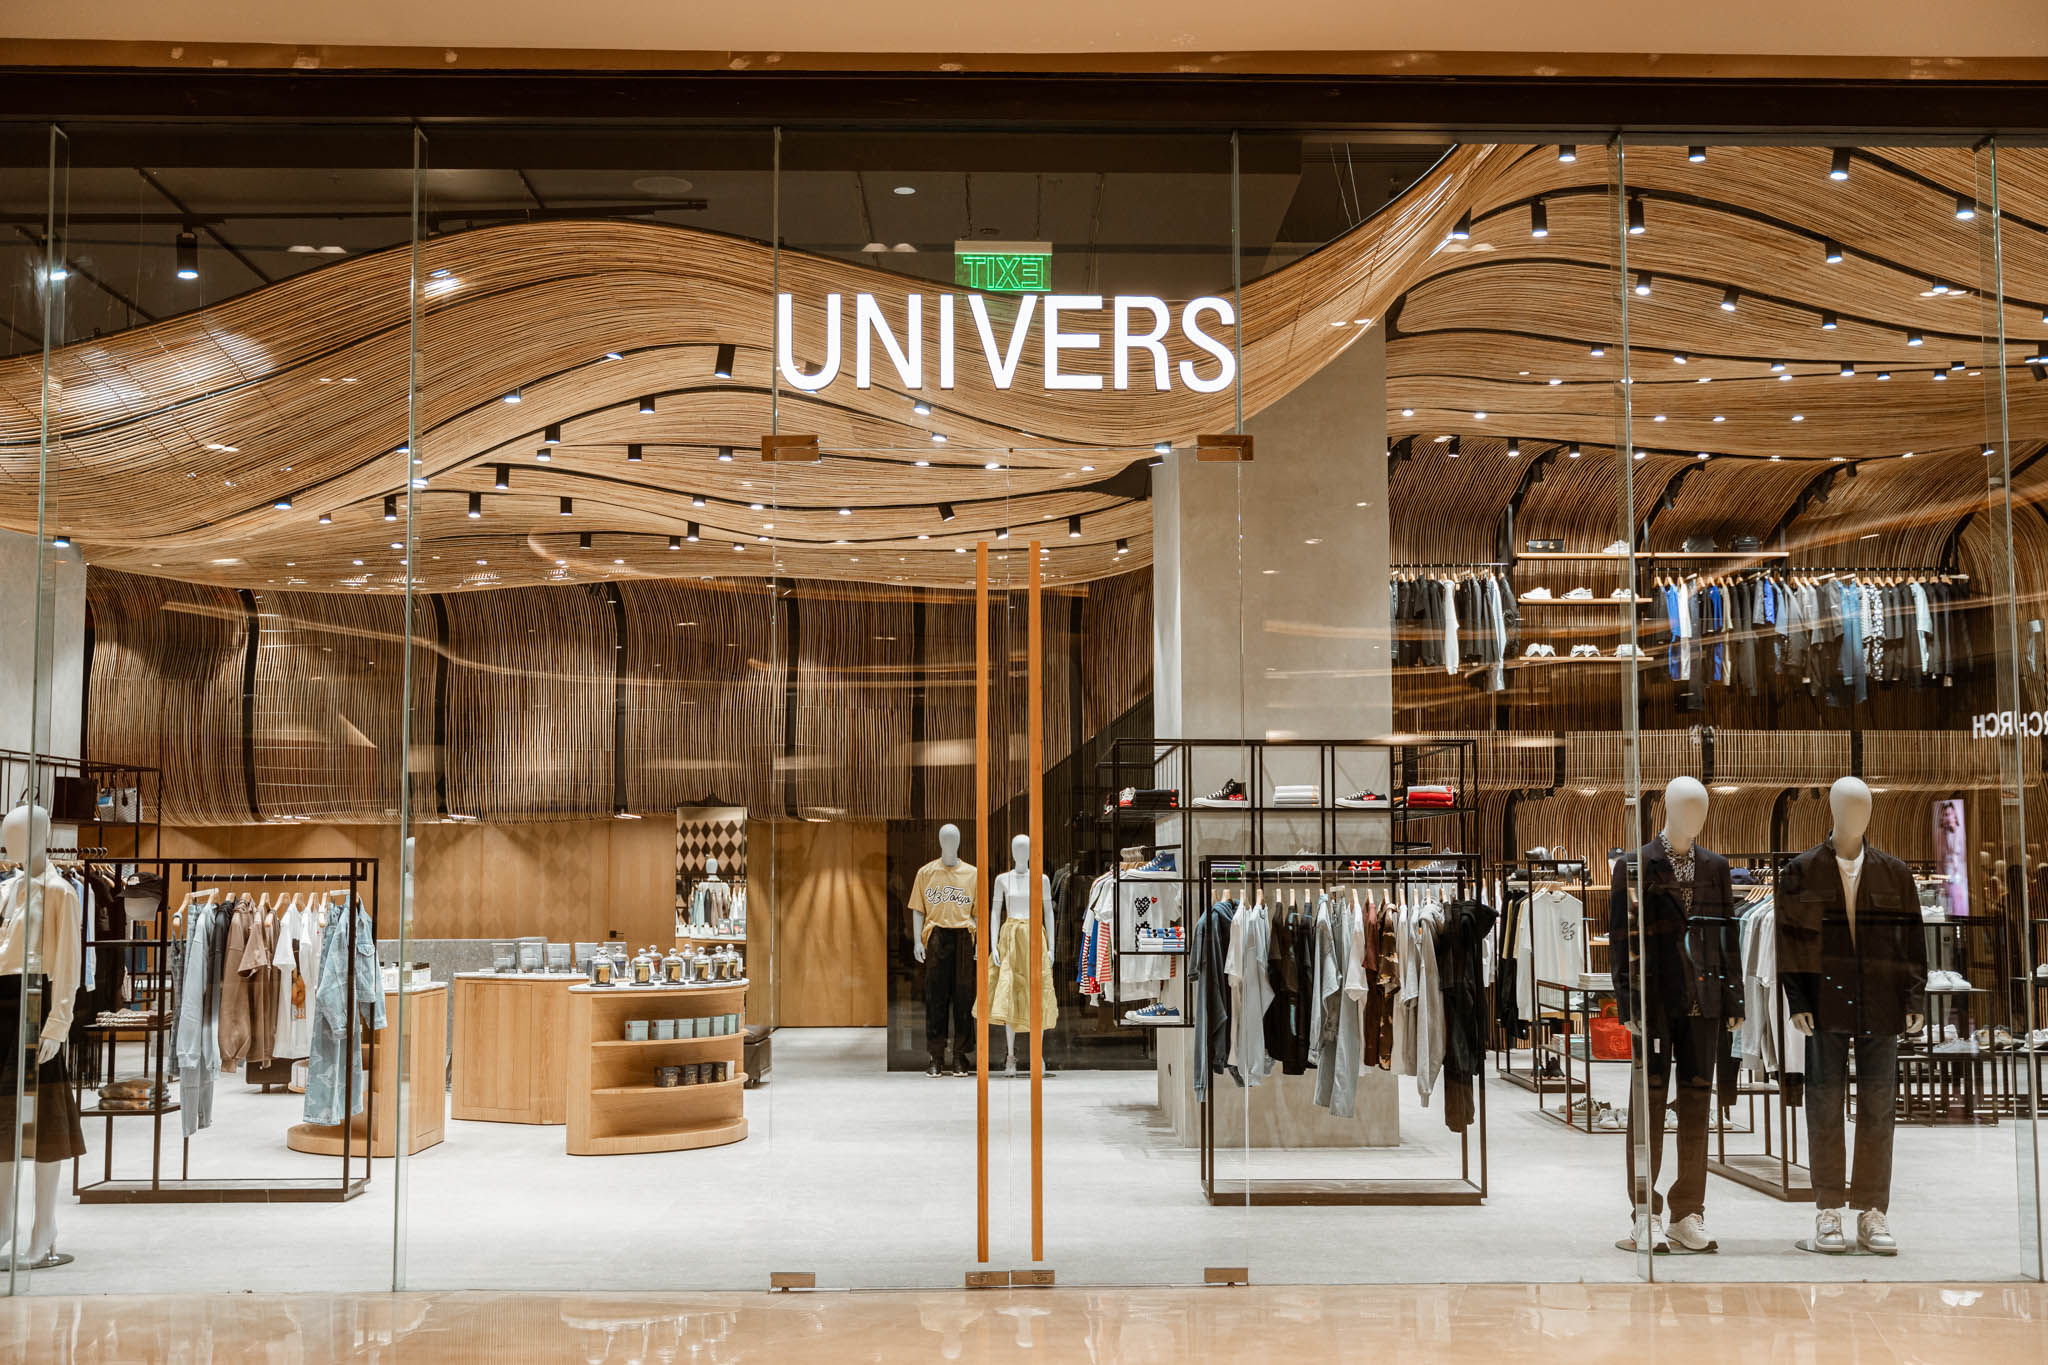 The UNIVERS NUSTAR storefront featuring its unique laminated rattan installation.